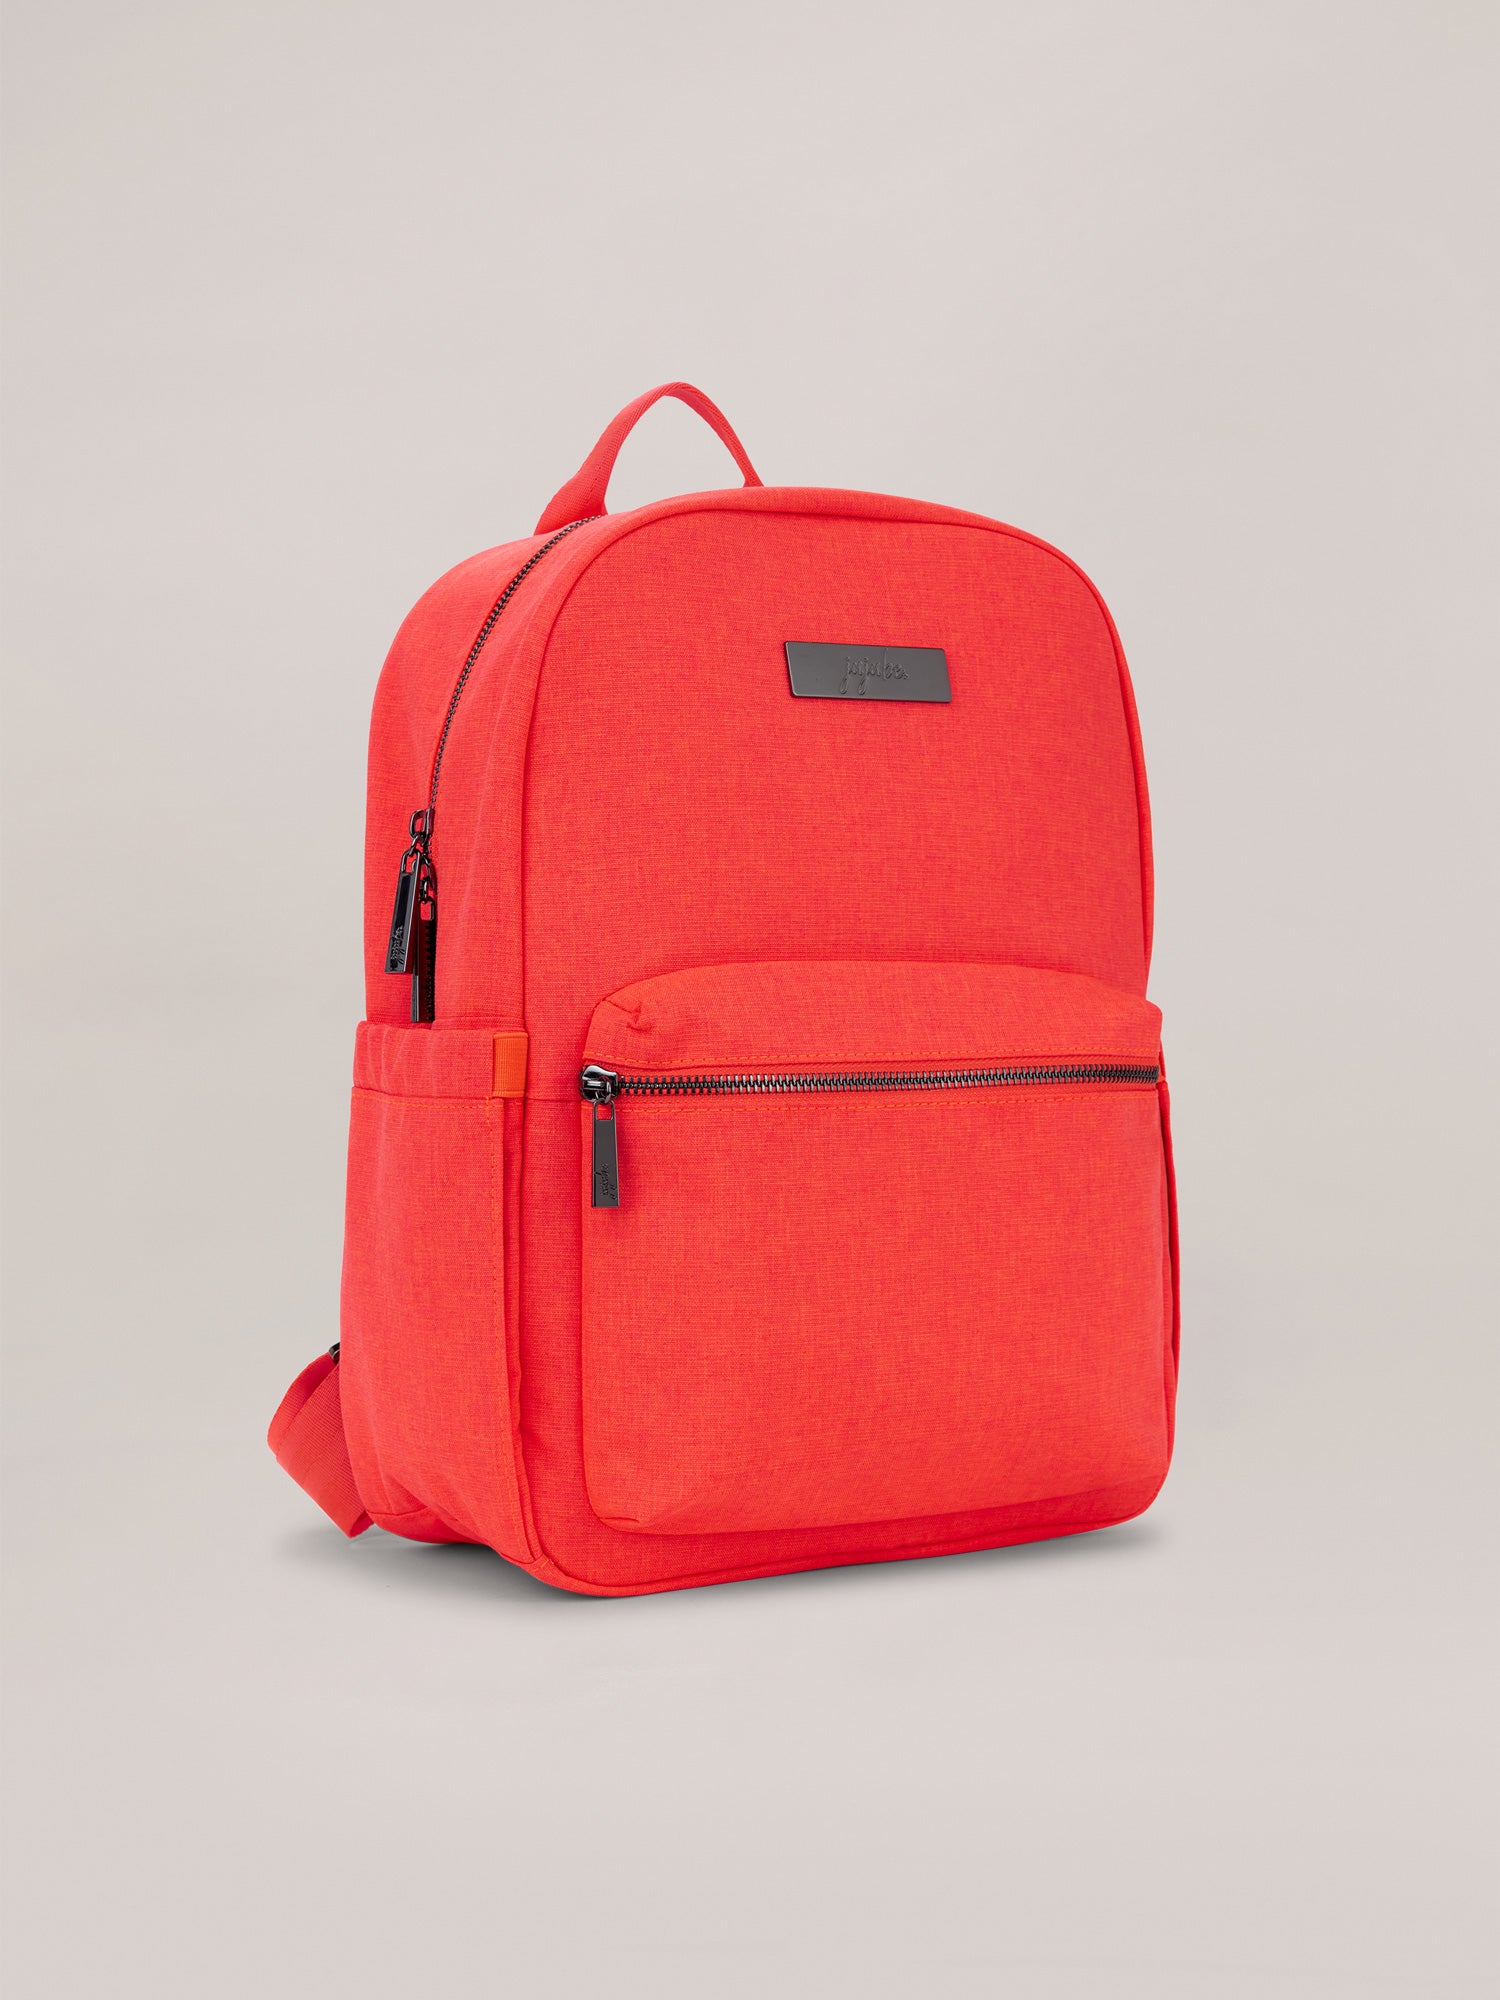 Neon Coral Pink Midi Backpack Quarter Angle View